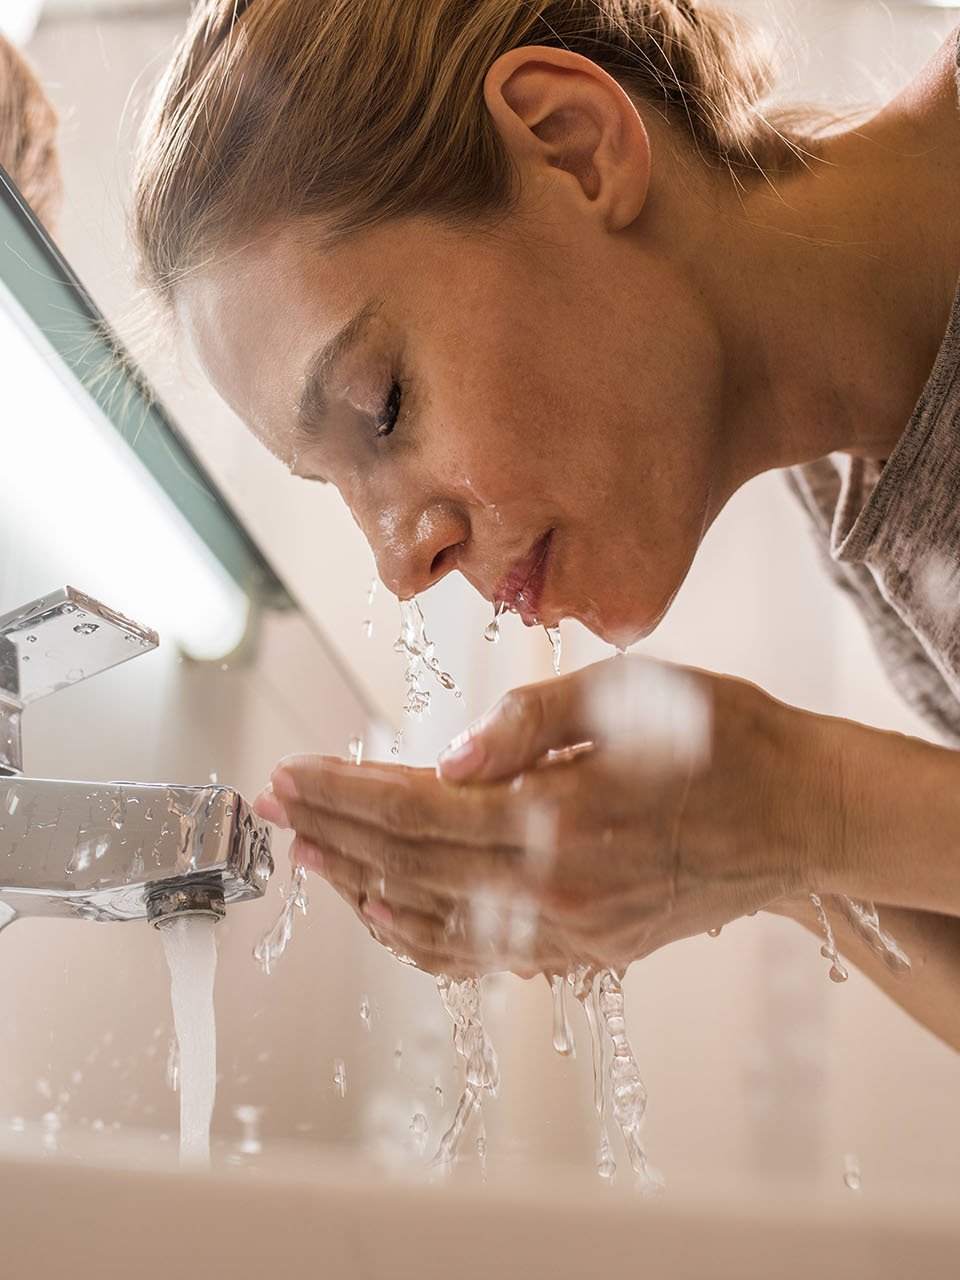 Woman washing her face over the sink